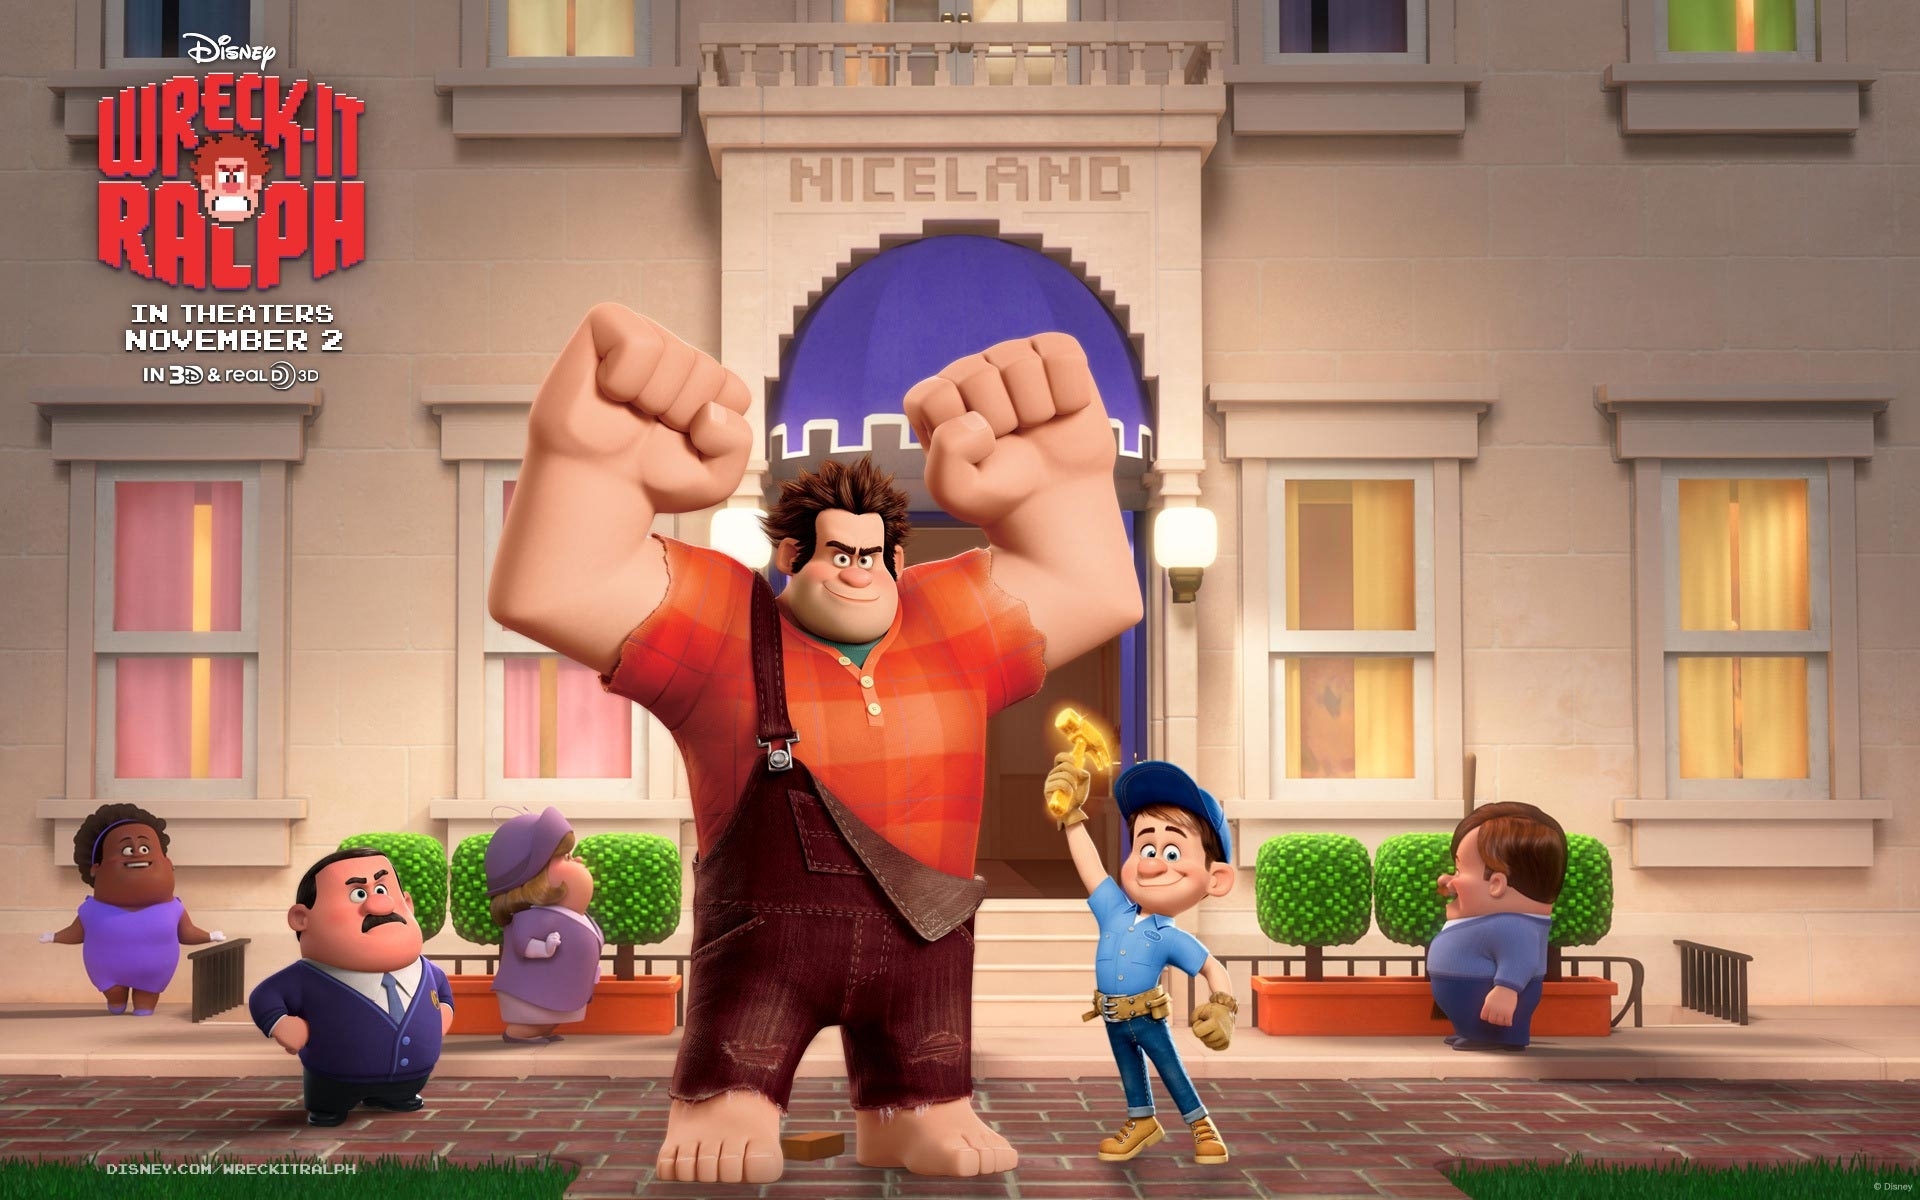 10 New Wreck It Ralph Wallpaper FULL HD 1080p For PC Background